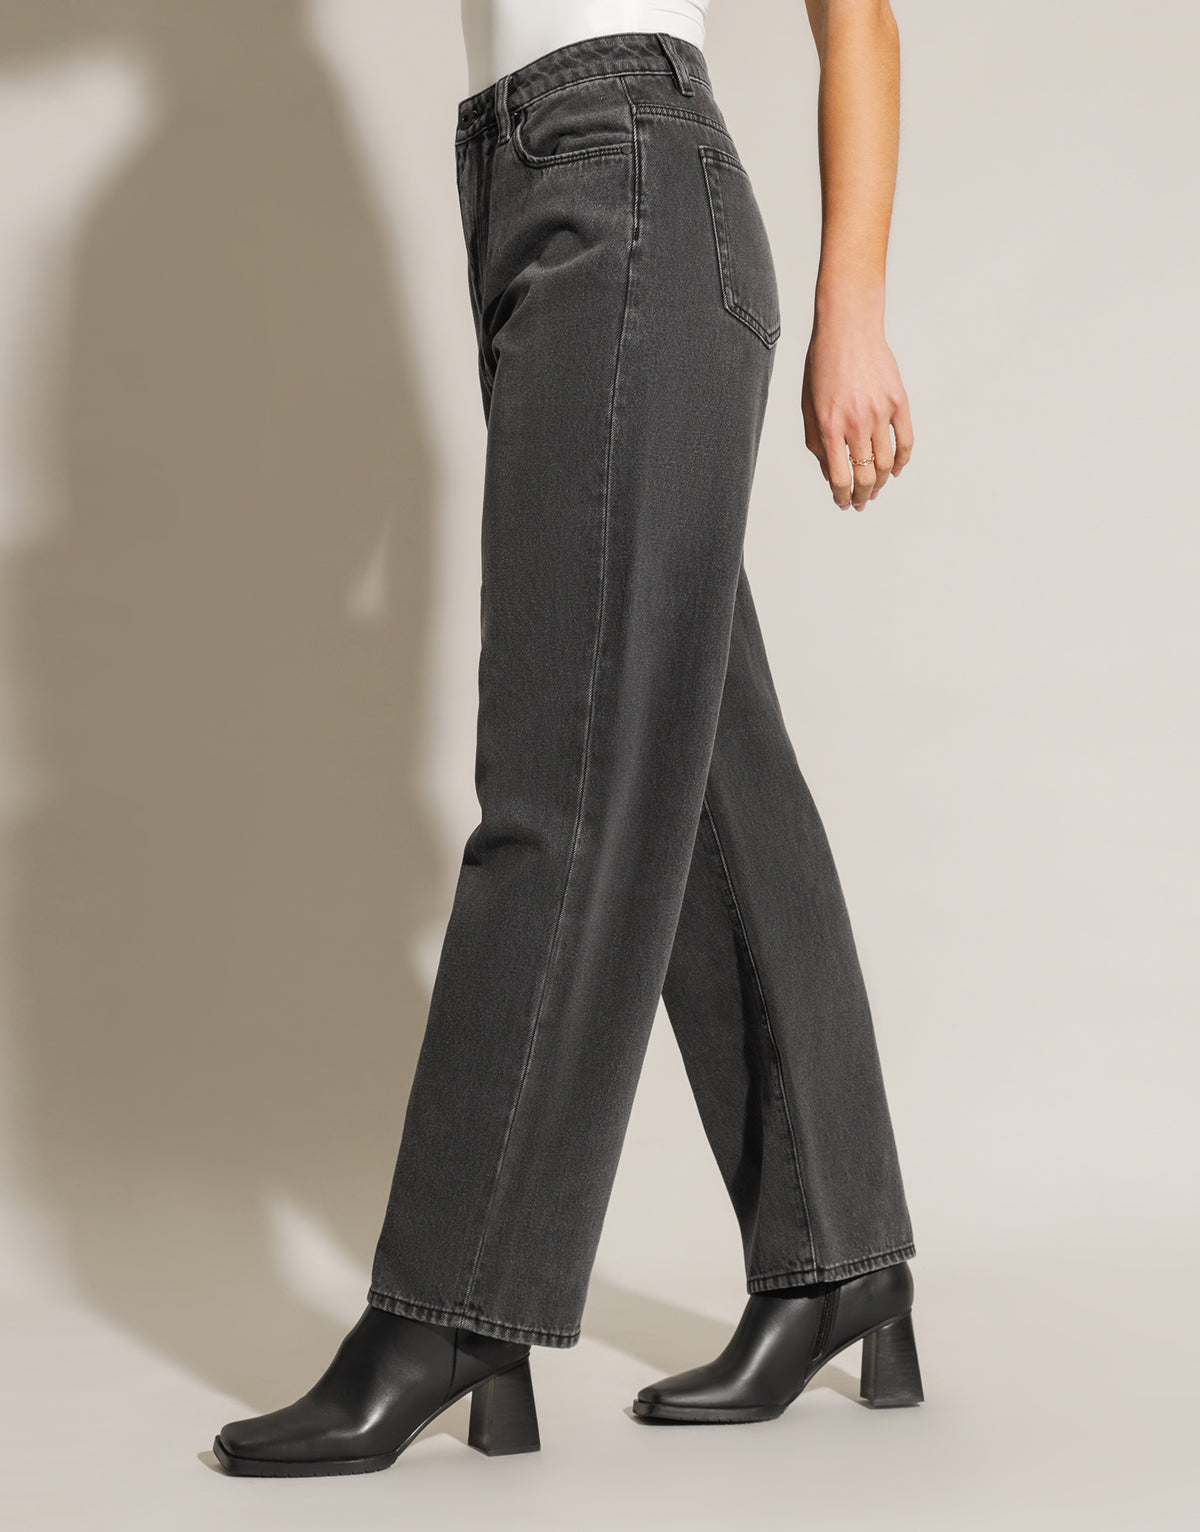 Kaia Baggy Jeans in Worn Black